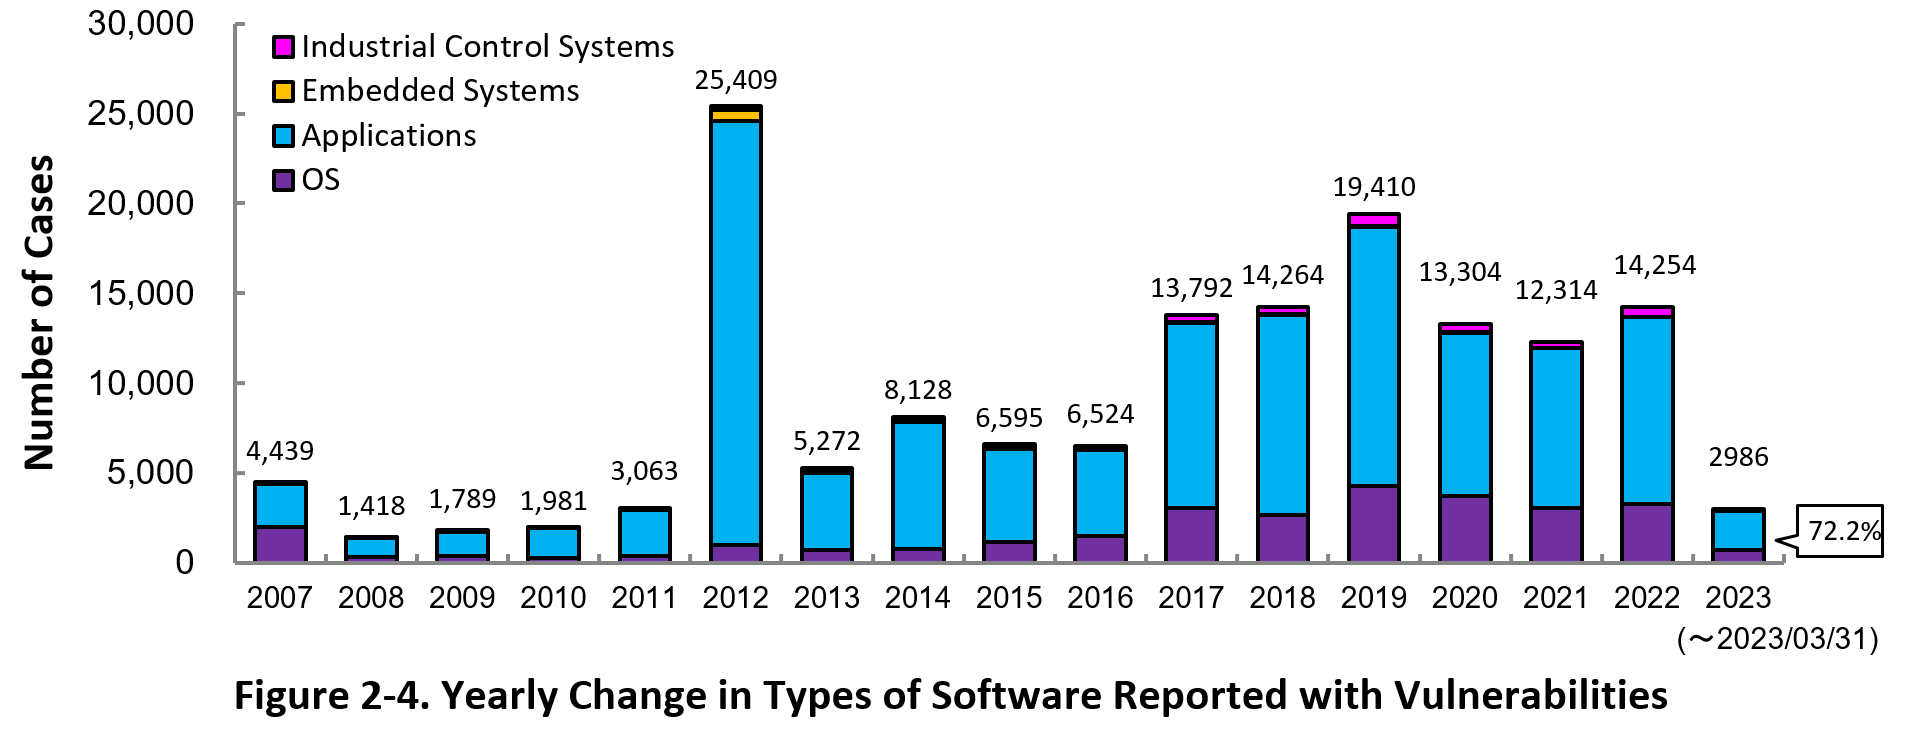 Figure 2-4. Yearly Change in Types of Software Reported with Vulnerabilities 